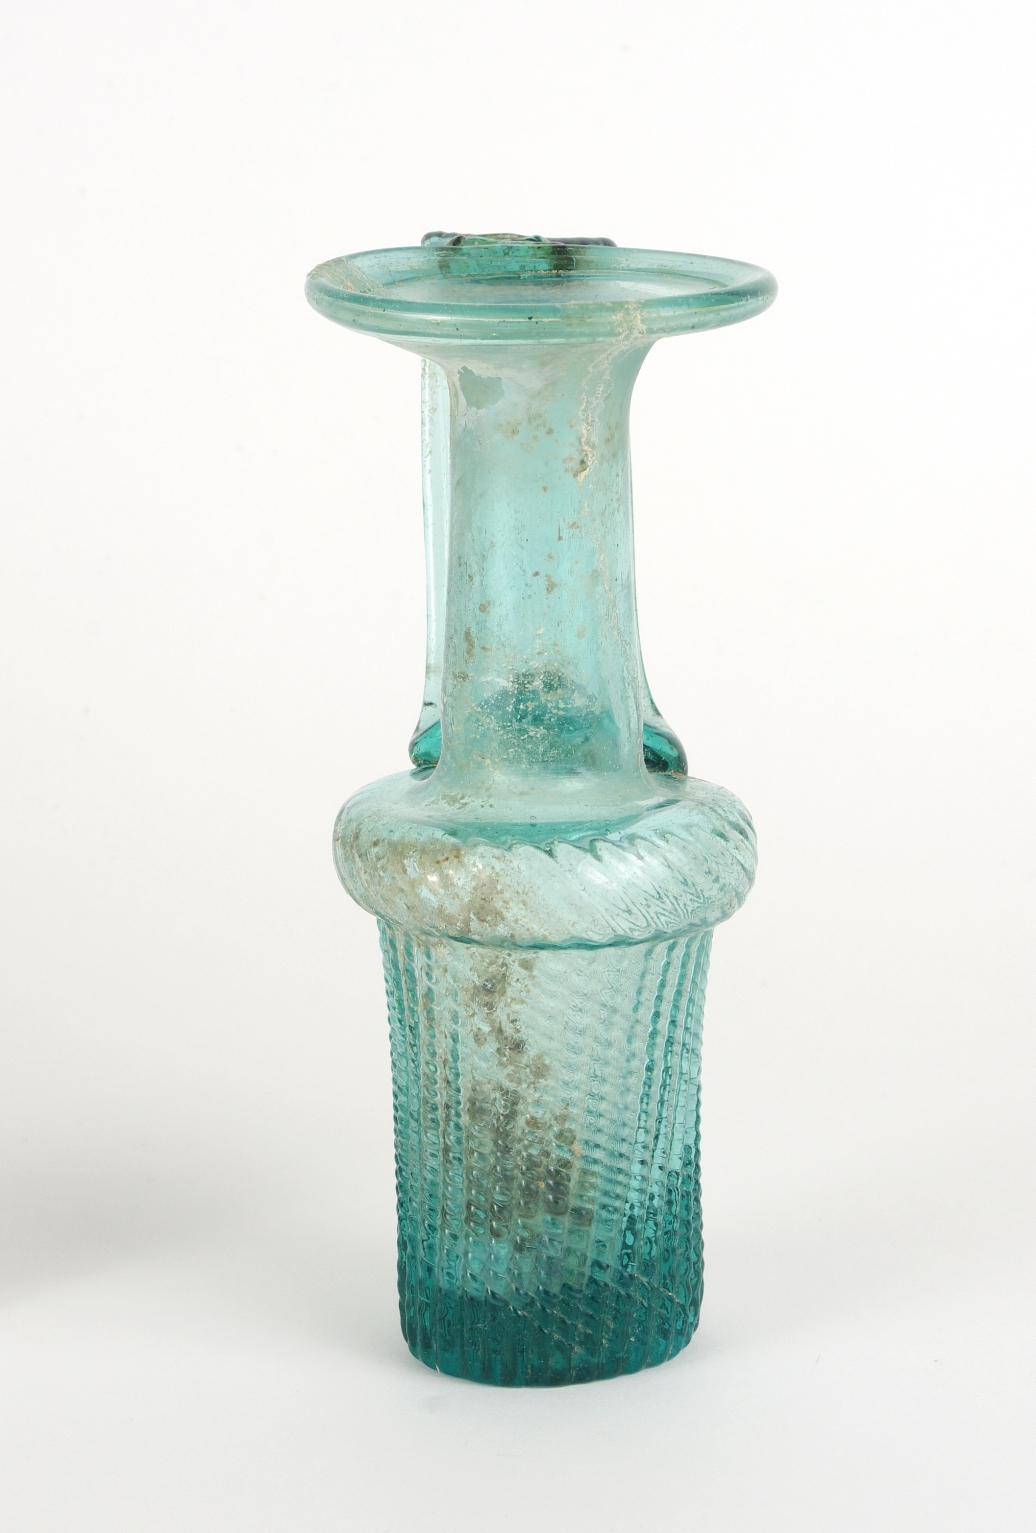 Early Byzantine Blown Glass Jug, Late 4th-Mid 5th Century AD